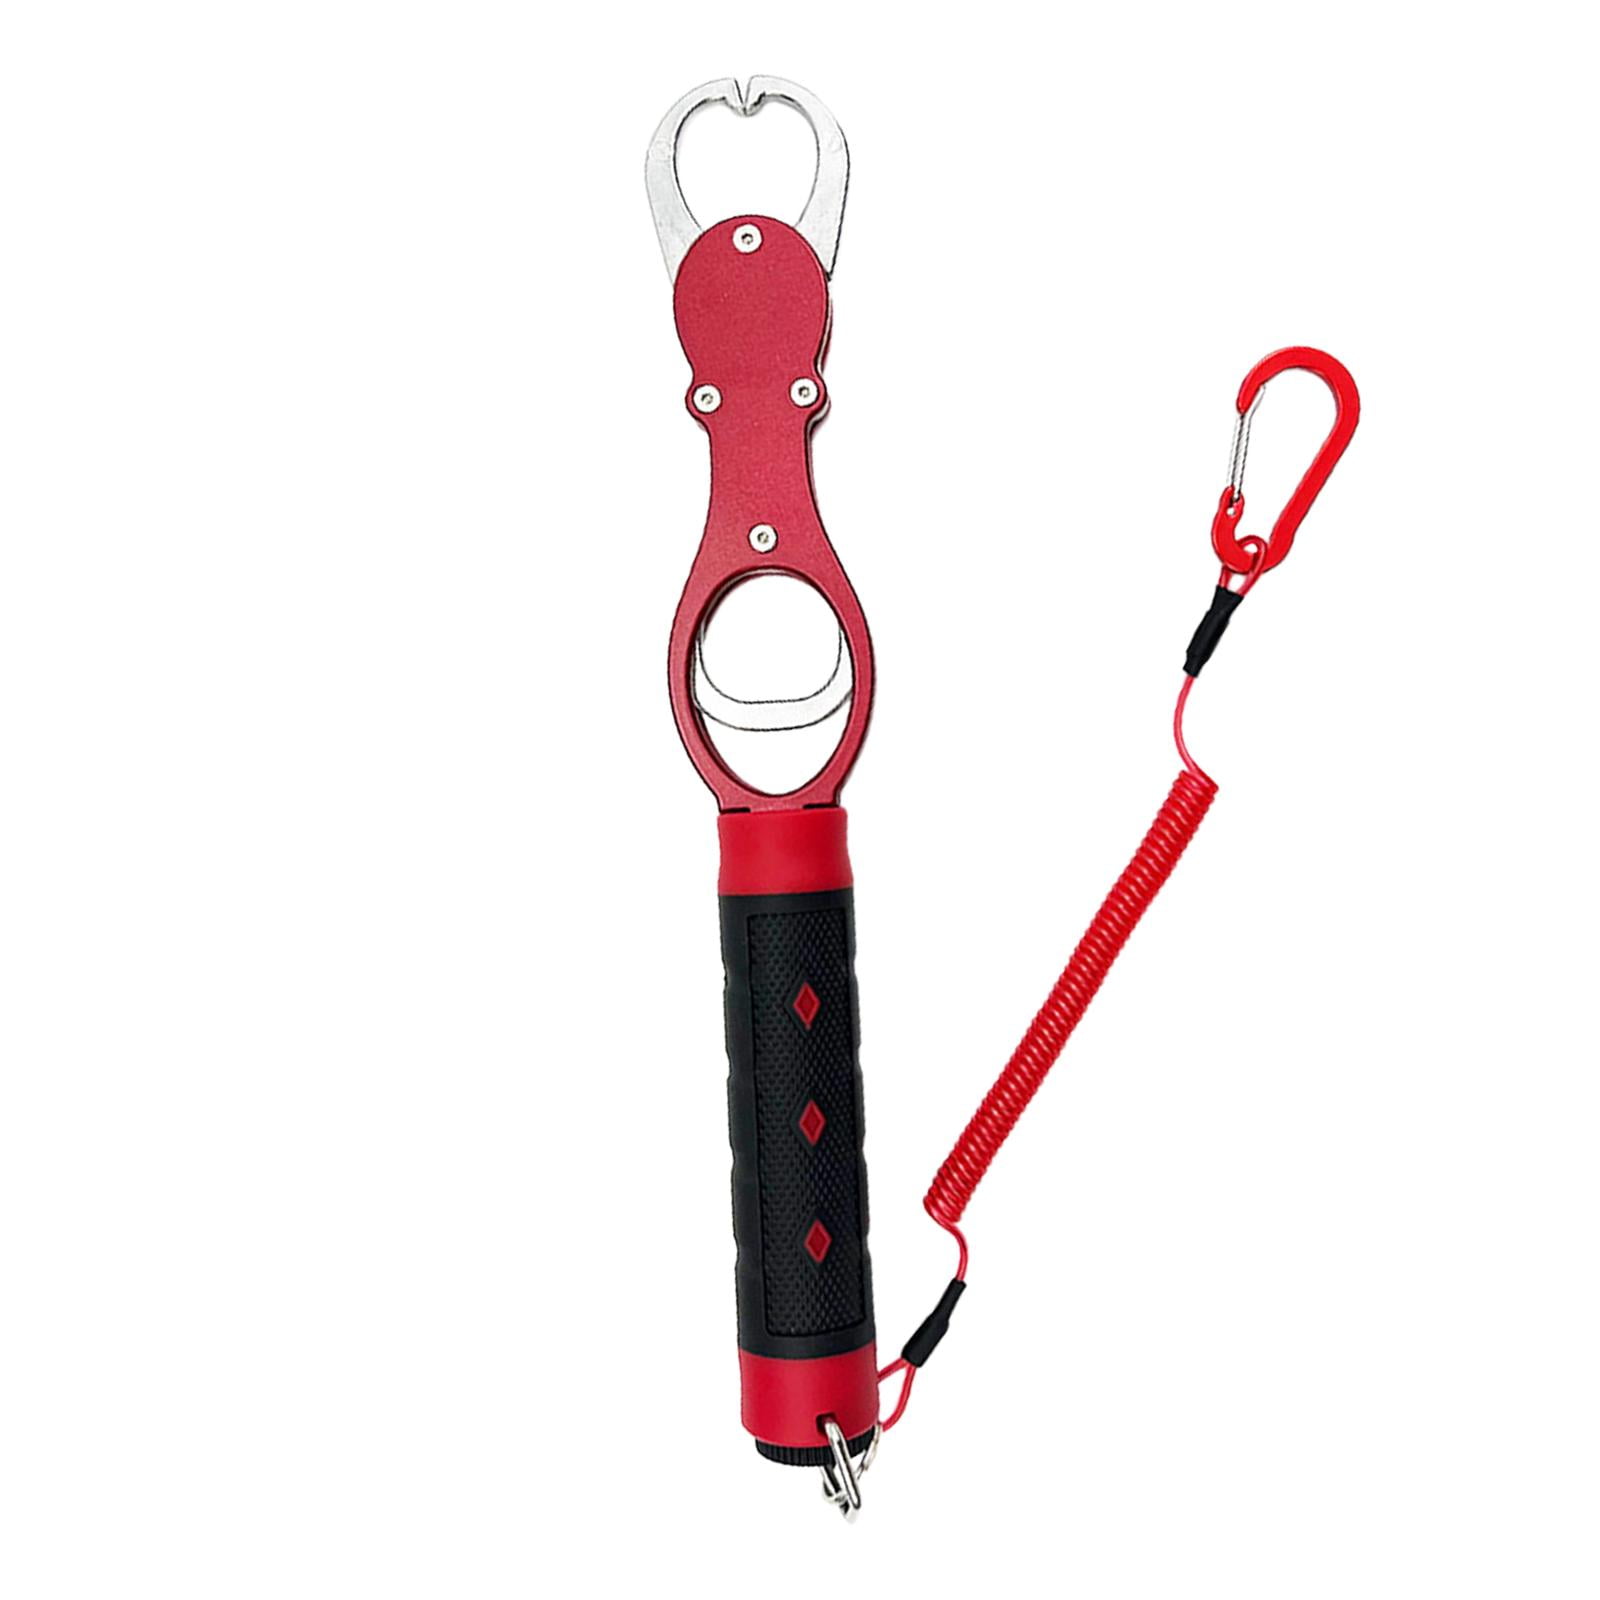 Fish Lip Gripper with Weight Scale Fish Lip Grip Tool Aluminum